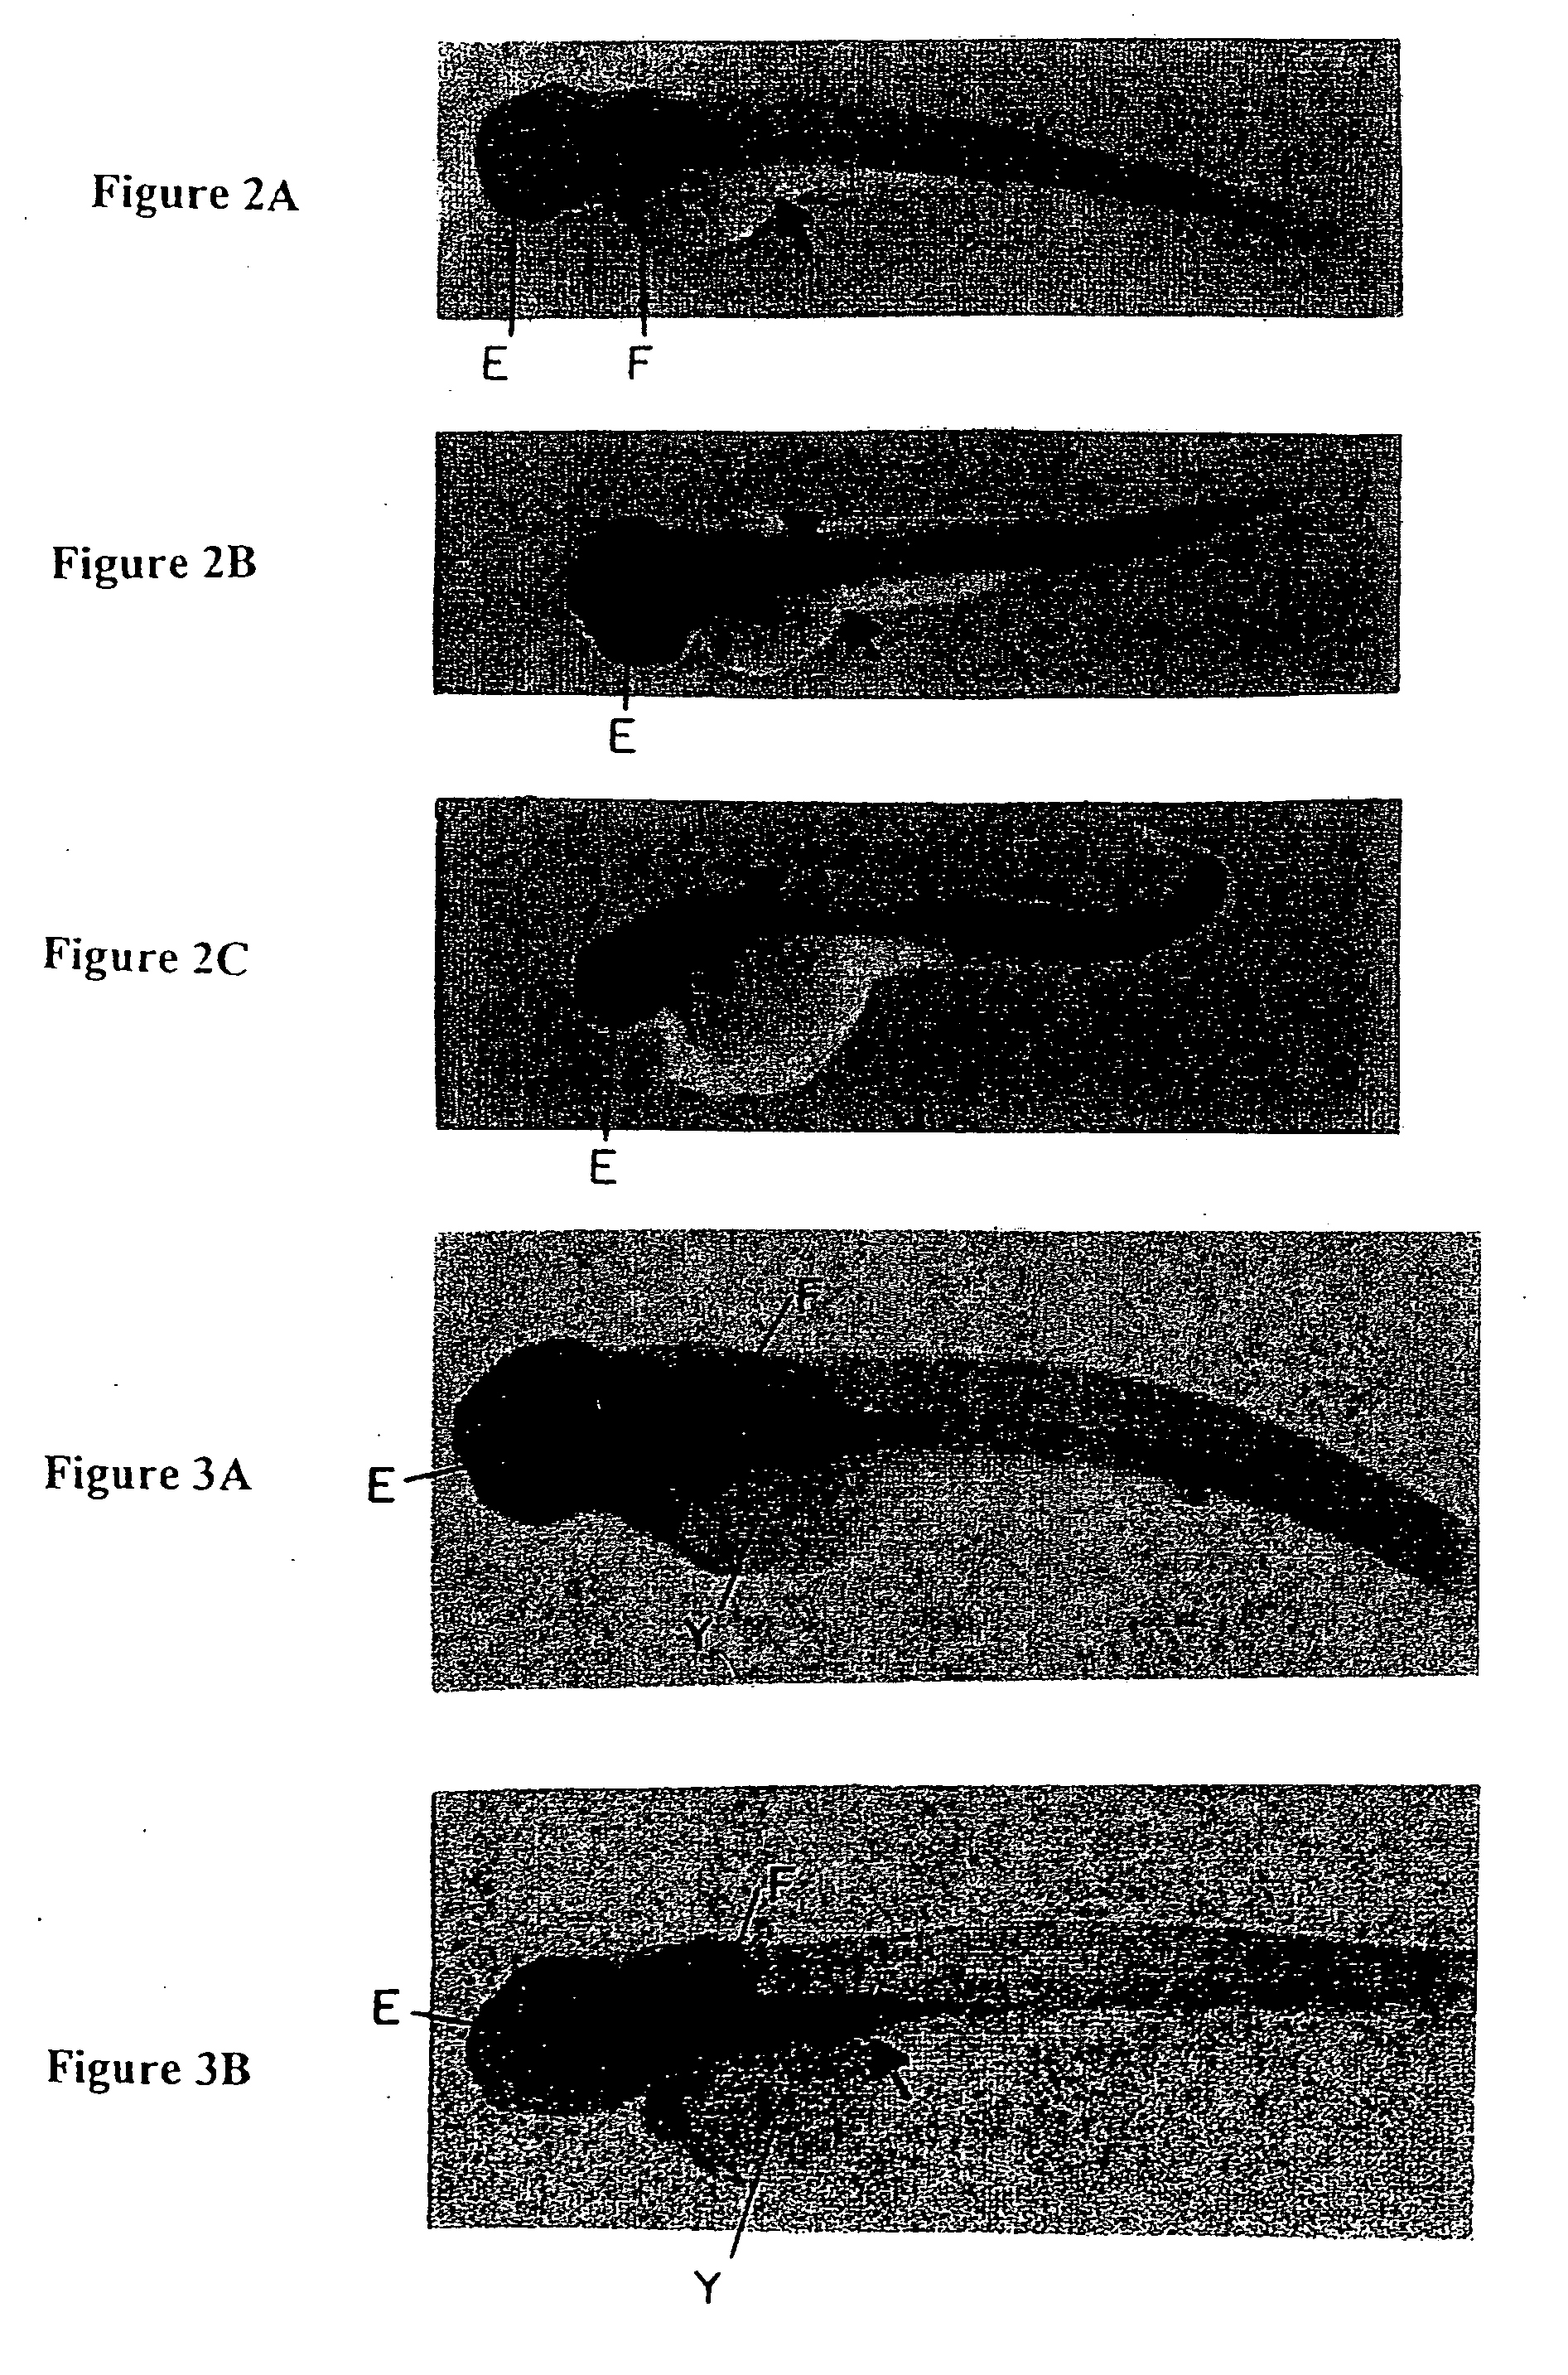 Methods of screening agents for activity using teleosts